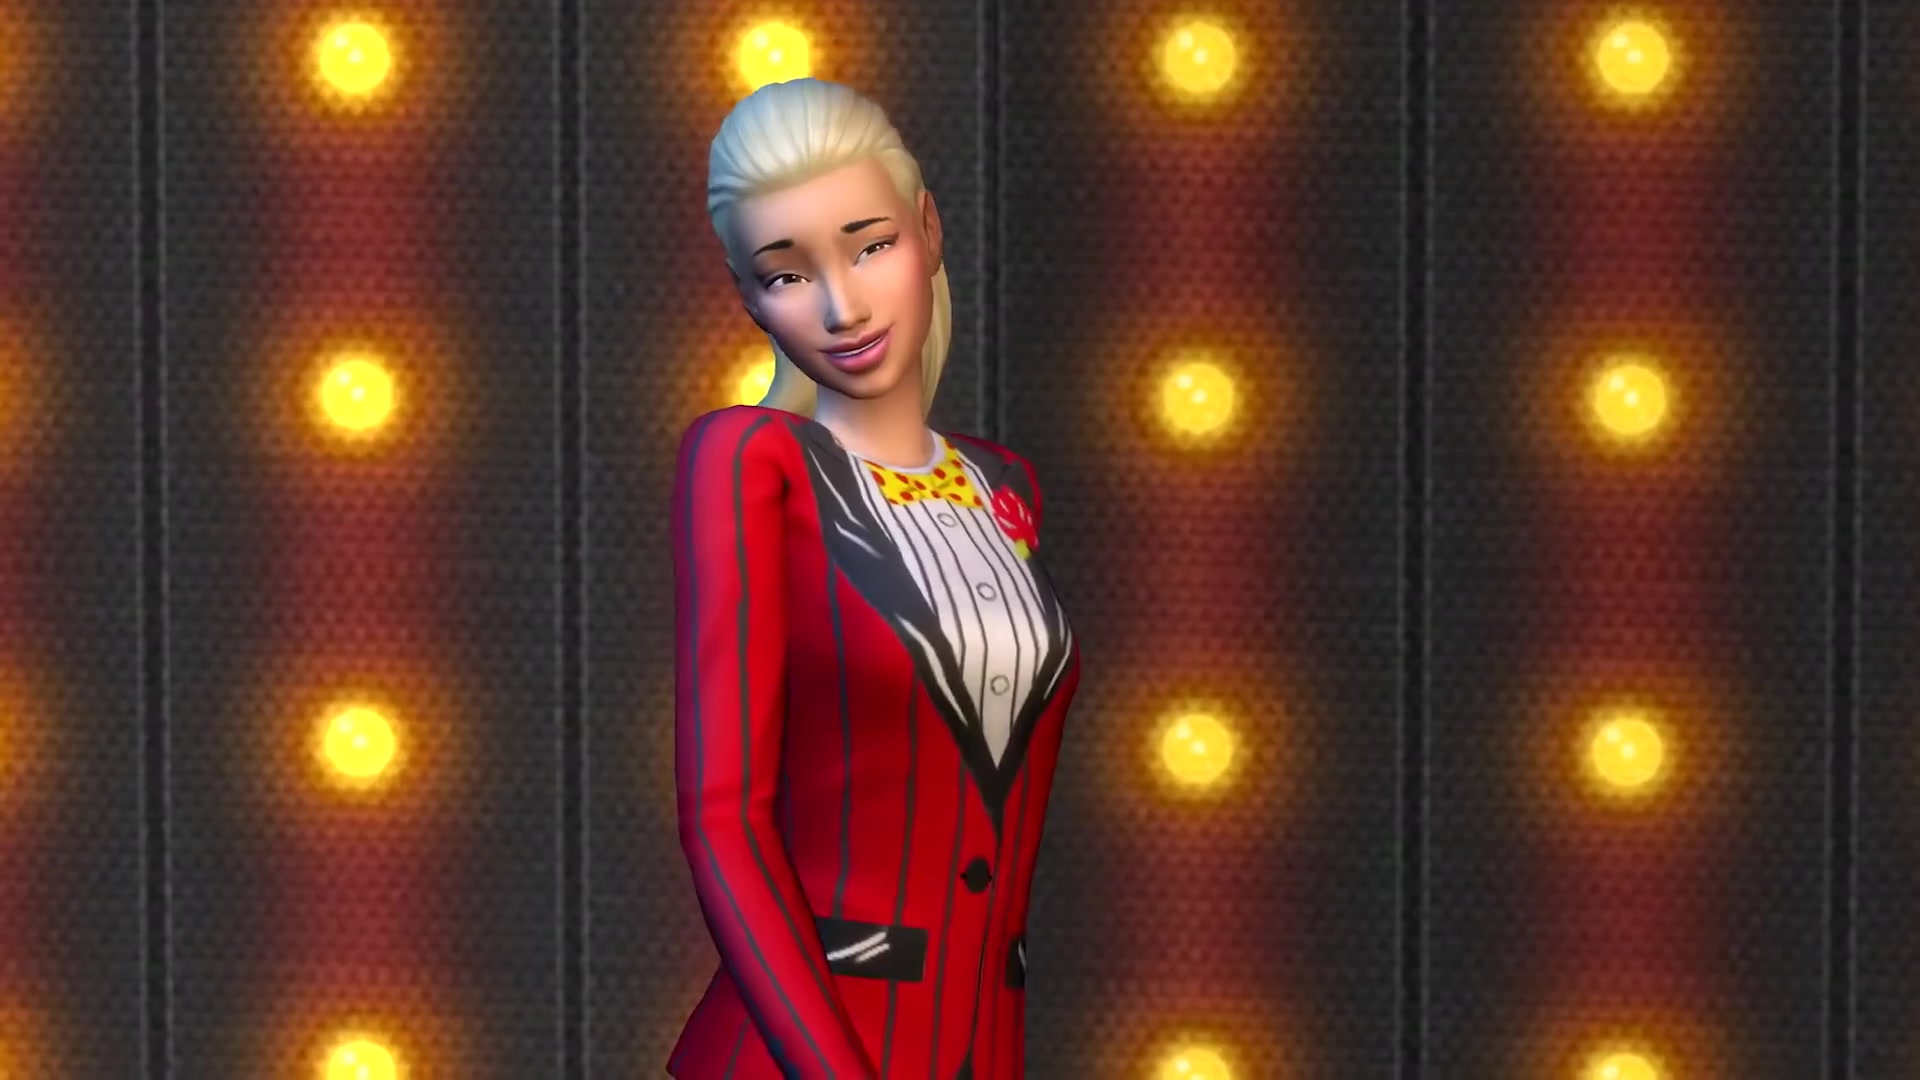 The Sims 4 Moschino Stuff: Over 45 Screens from the New Trailer